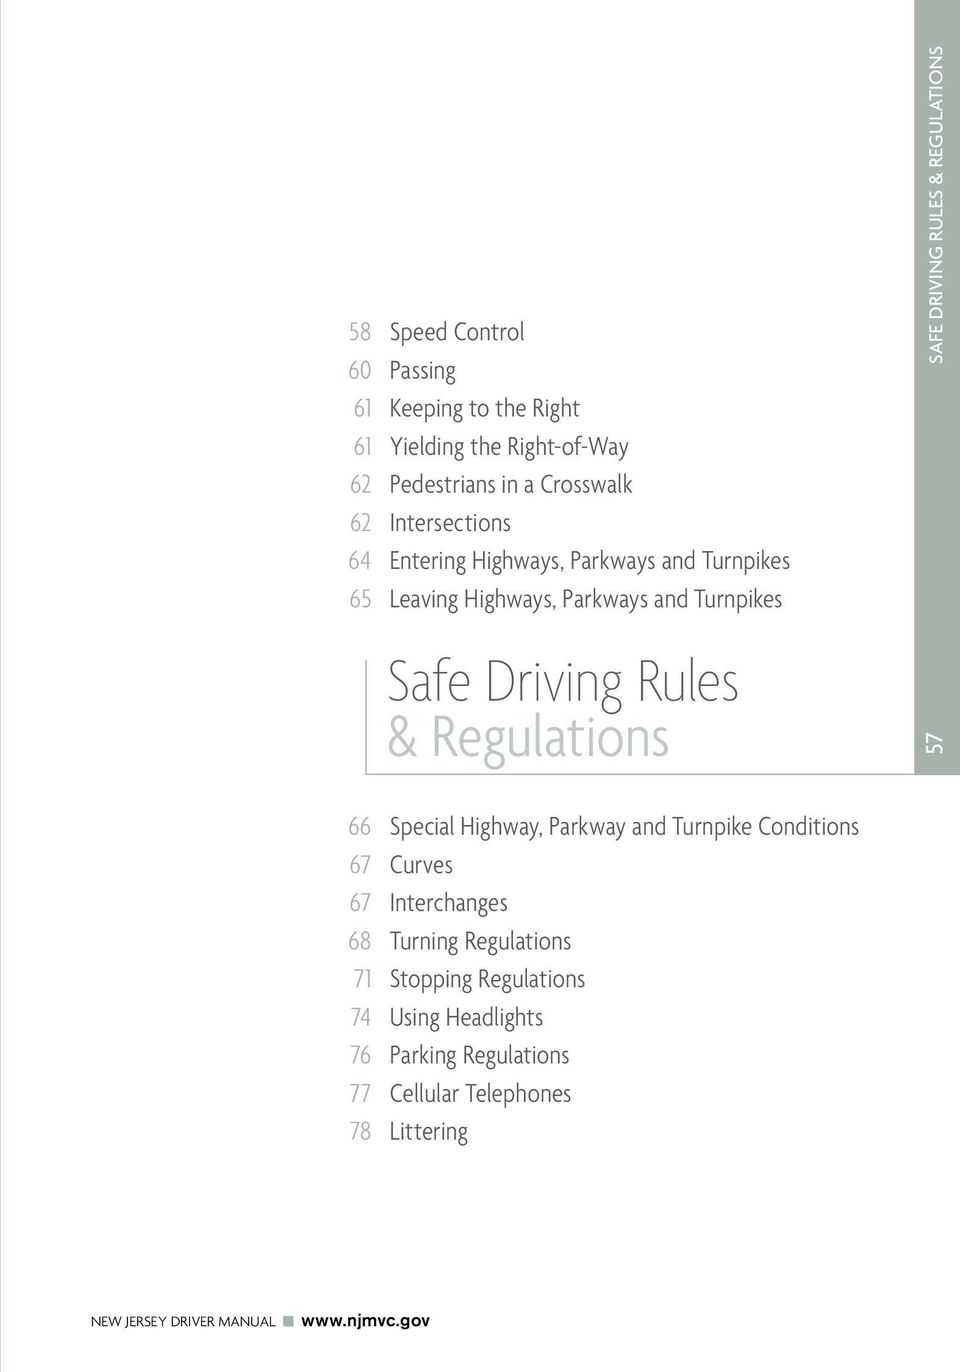 Safe Driving Rules & Regulations 57 66 67 67 68 71 74 76 77 78 Special Highway, Parkway and Turnpike Conditions Curves Interchanges